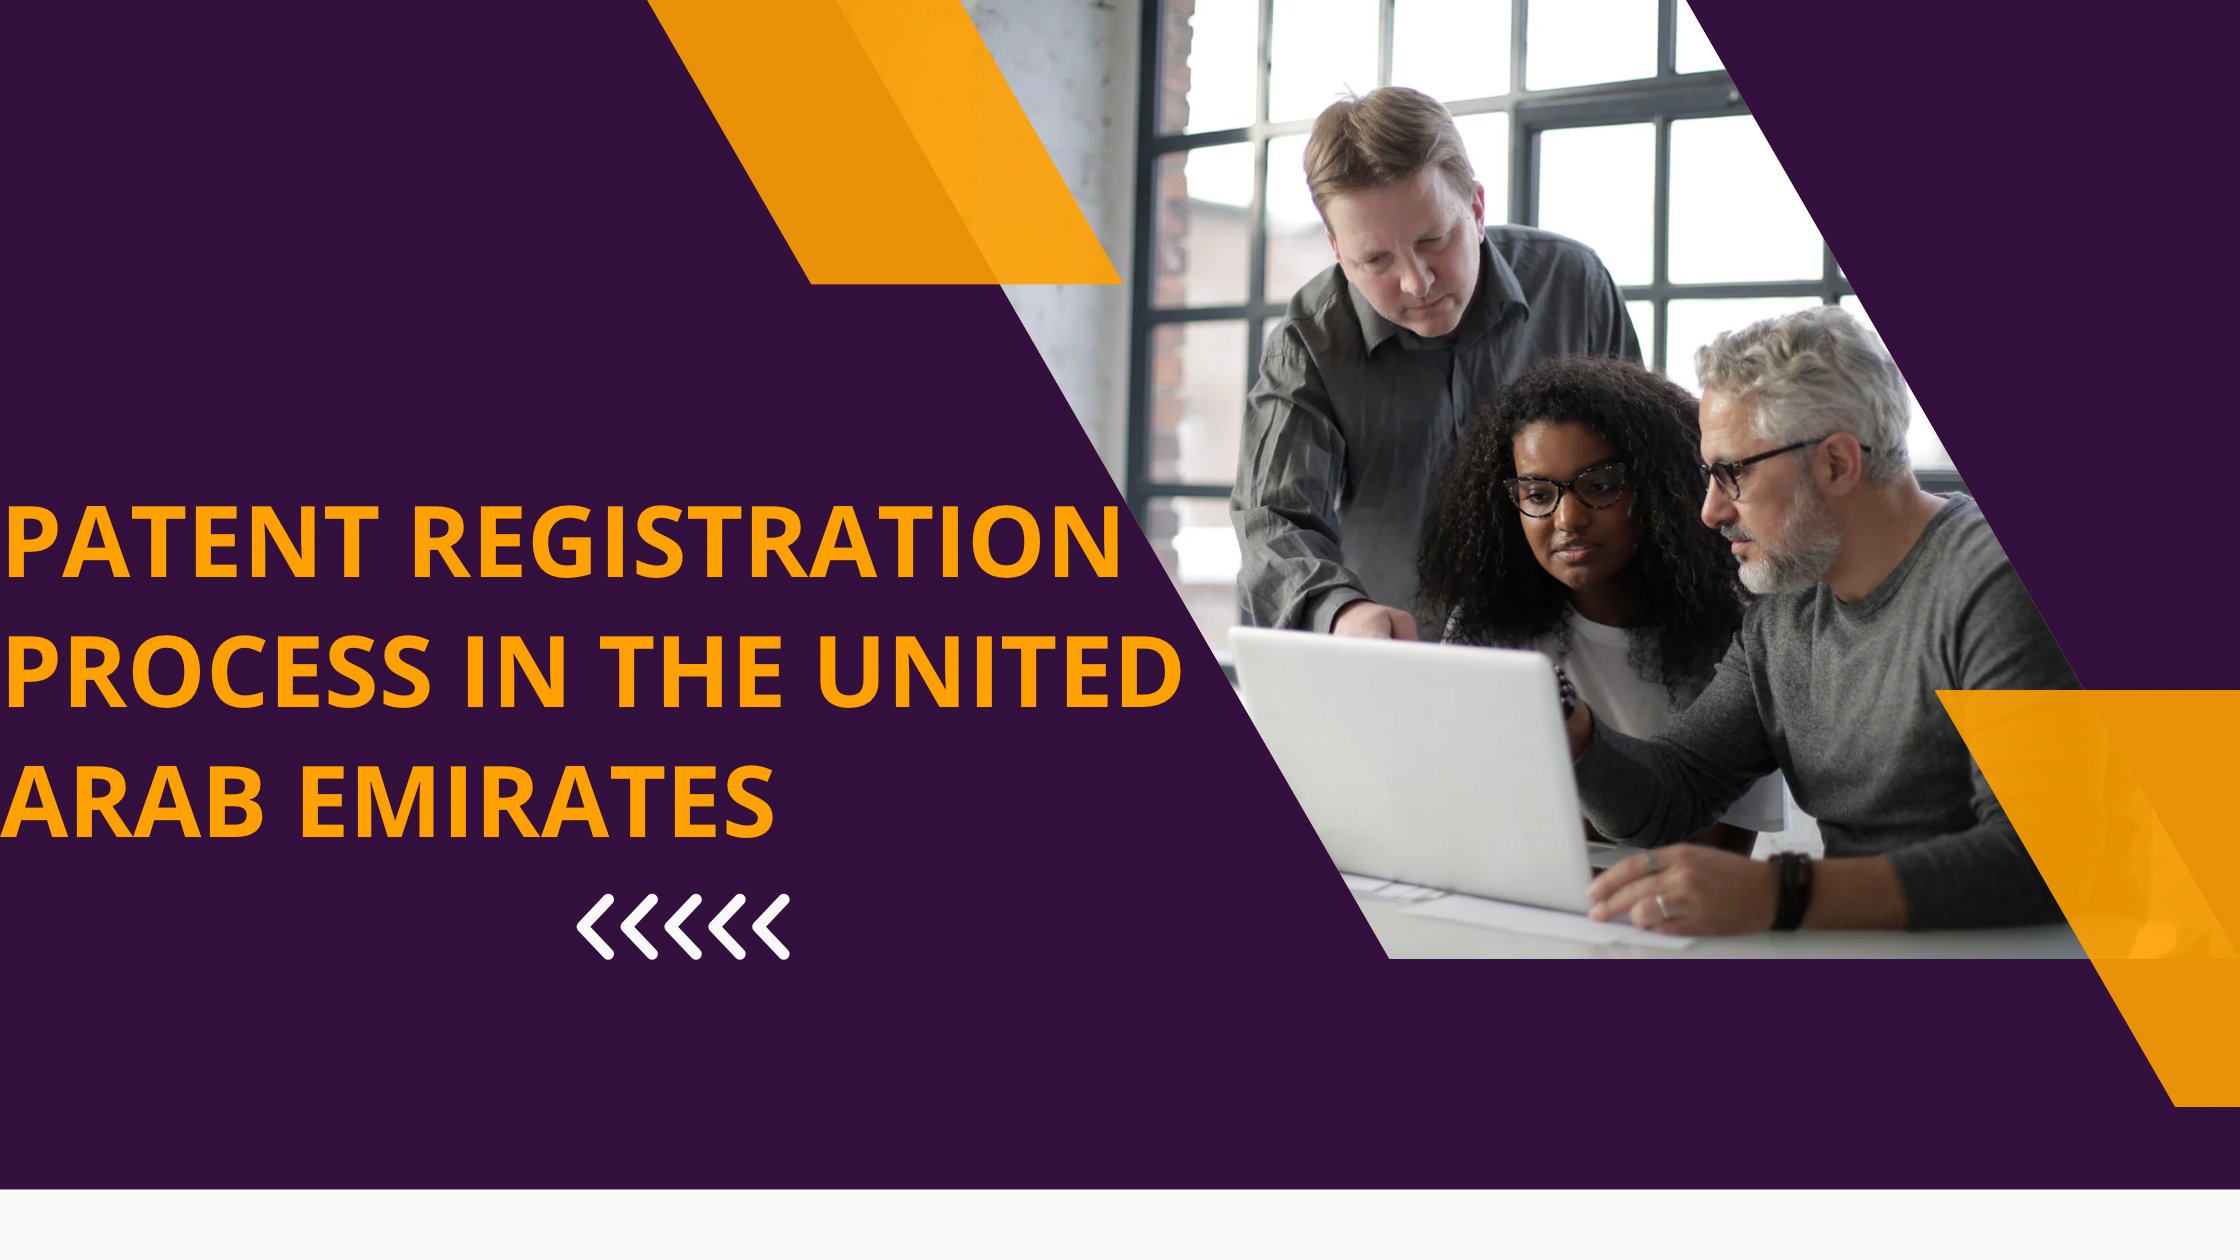 Patent Registration Process in the United Arab Emirates.